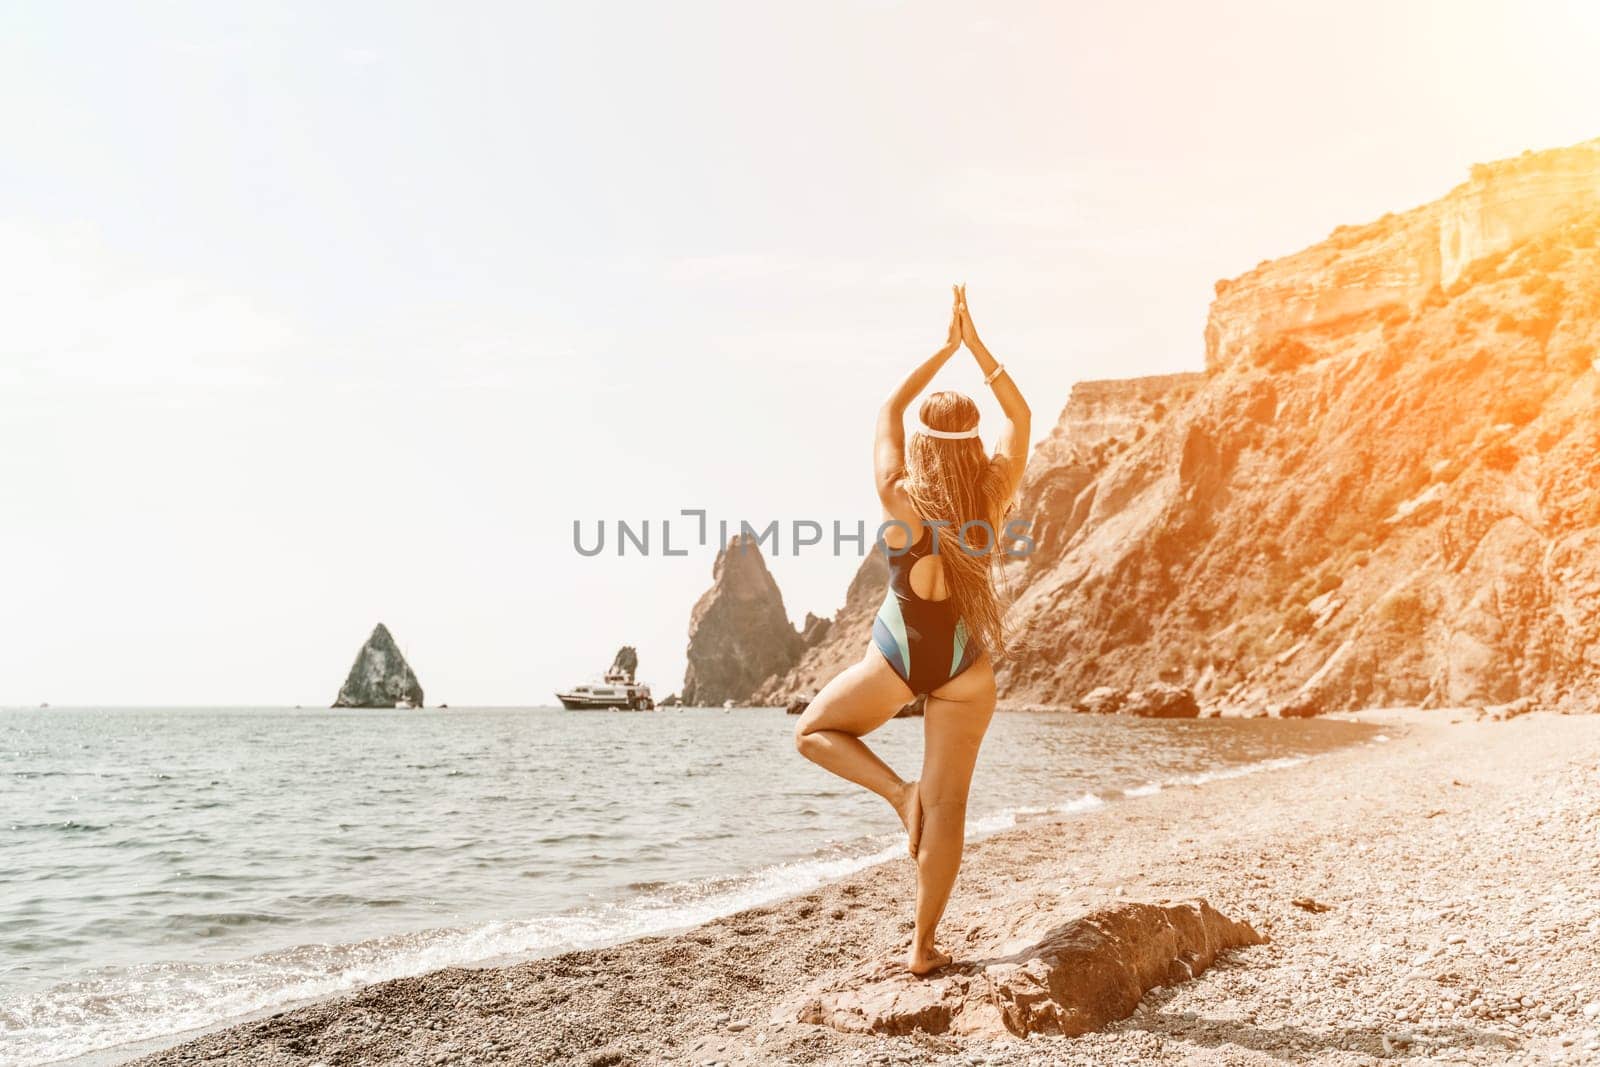 Yoga on the beach. A happy woman meditating in a yoga pose on the beach, surrounded by the ocean and rock mountains, promoting a healthy lifestyle outdoors in nature, and inspiring fitness concept. by Matiunina